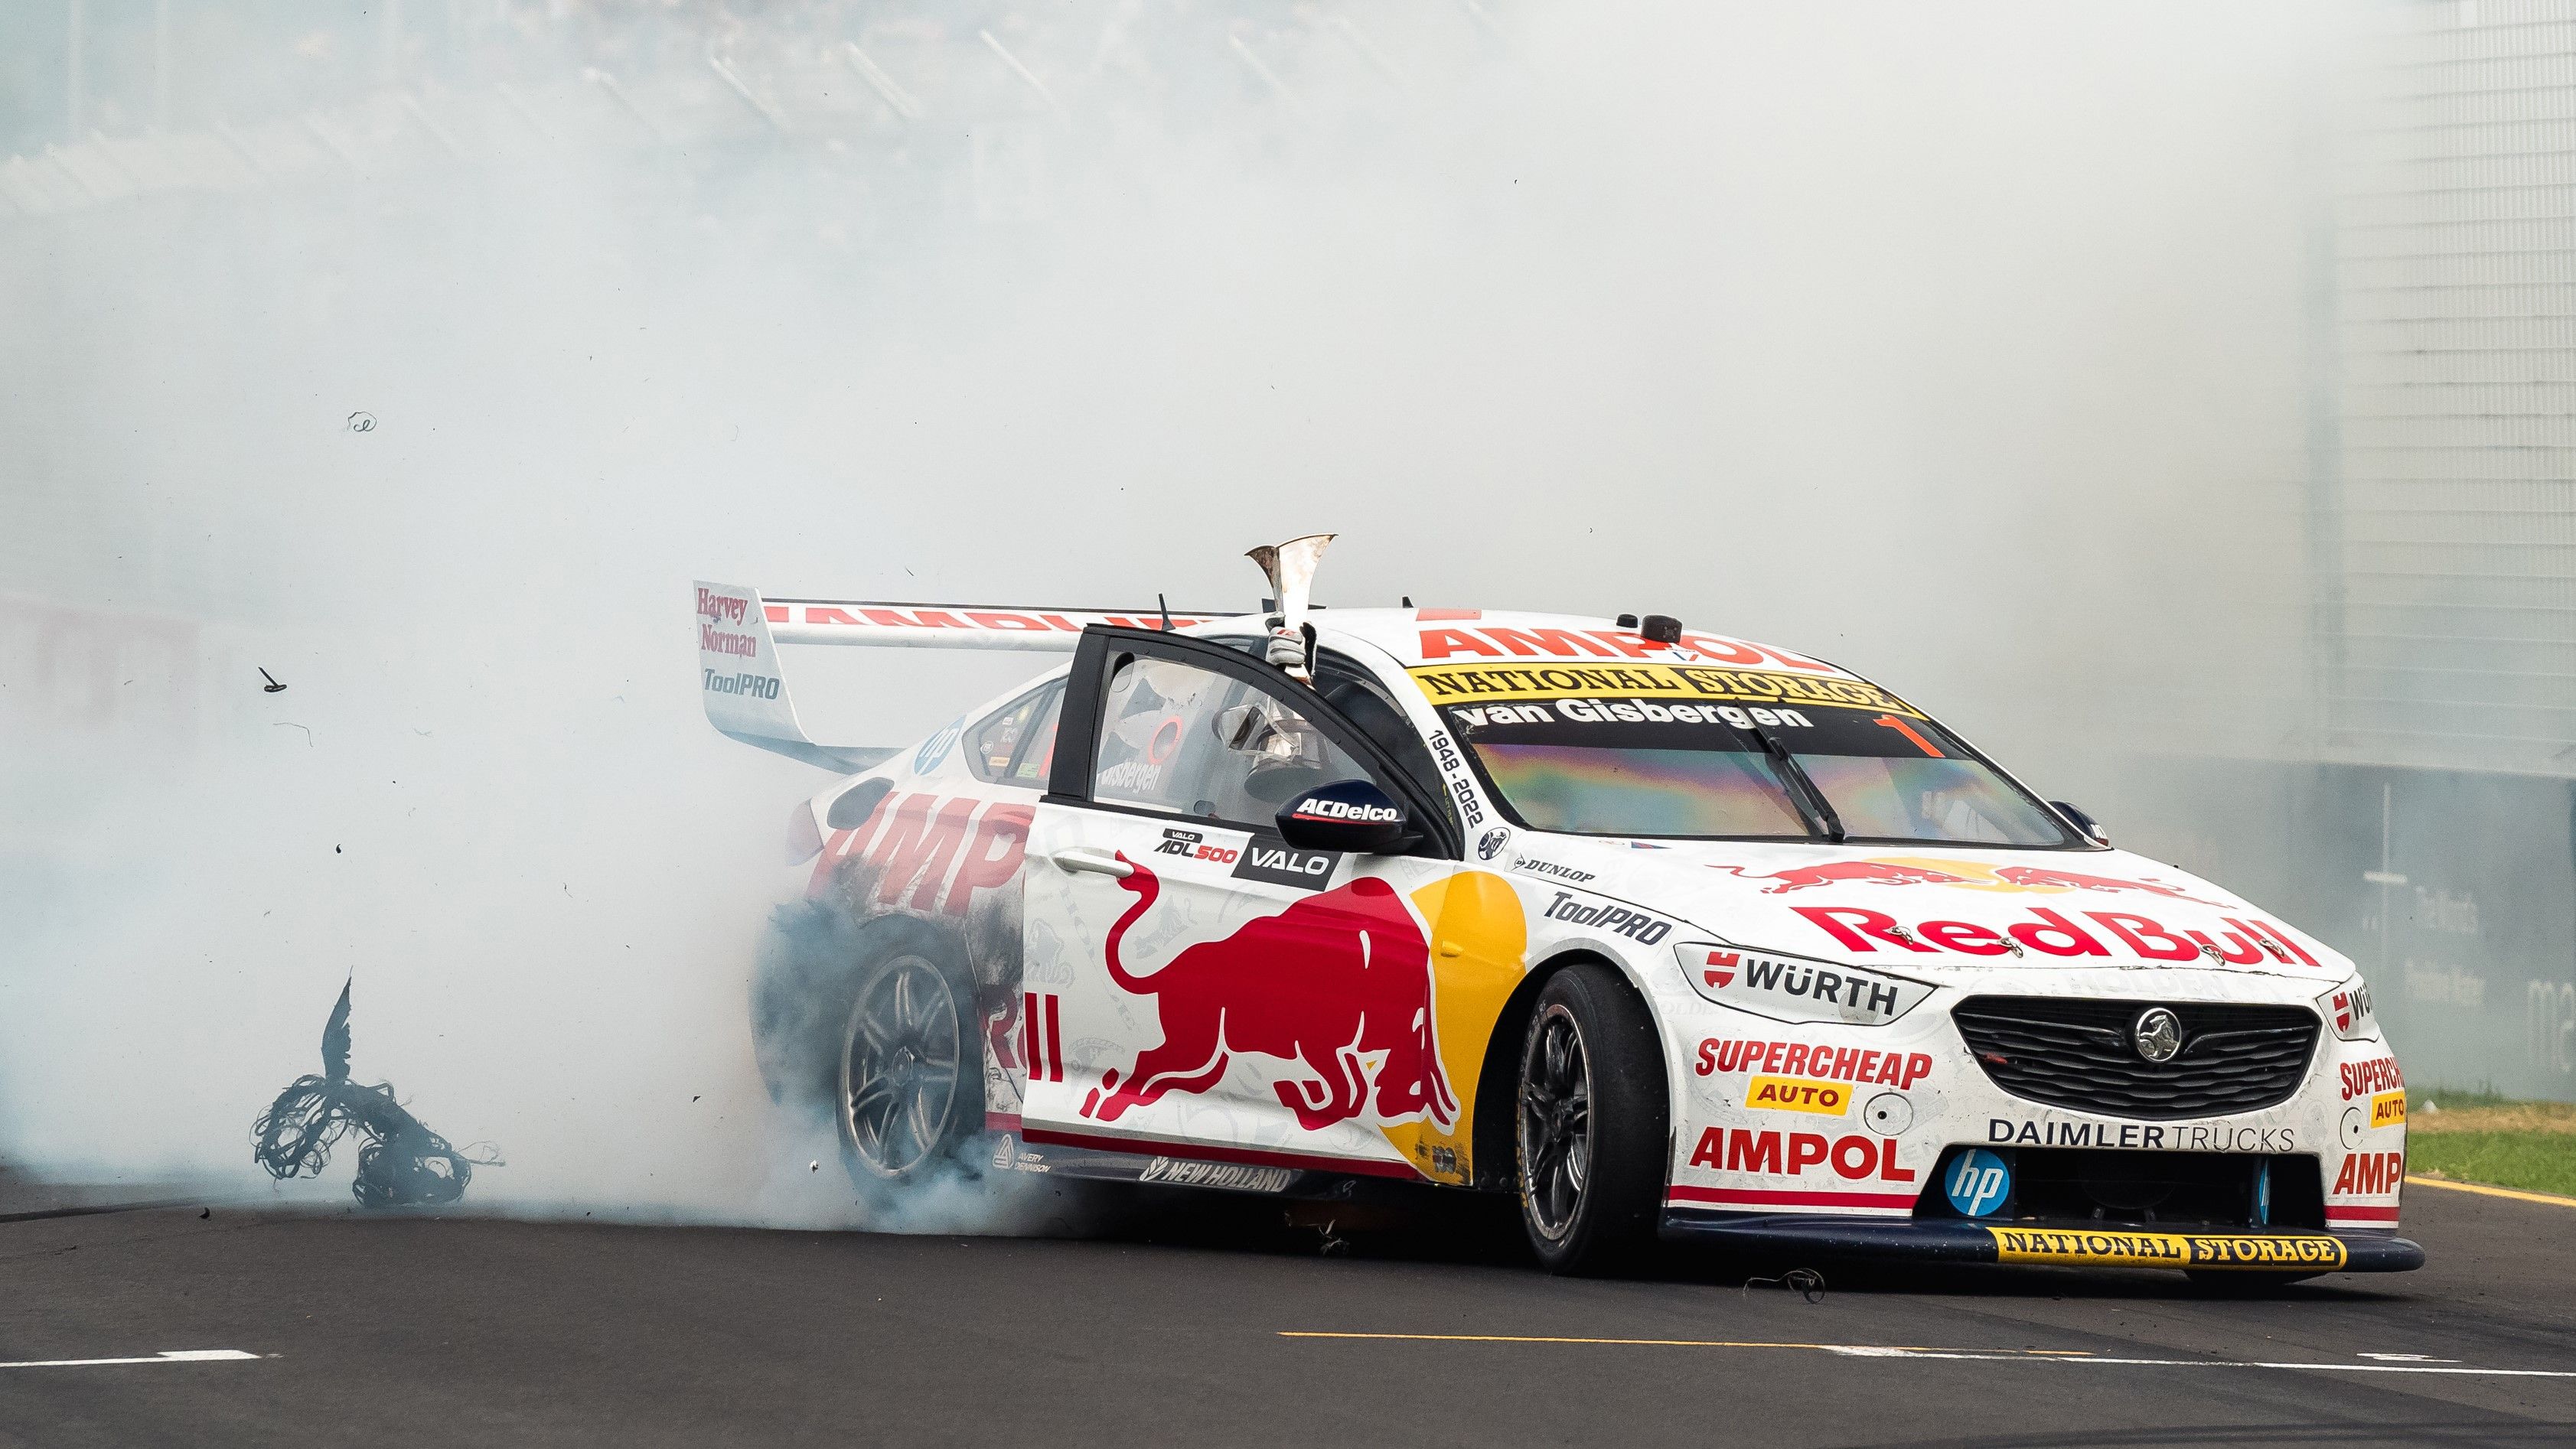 Shane van Gisbergen celebrates his Supercars title win with burnouts at the Adelaide 500.